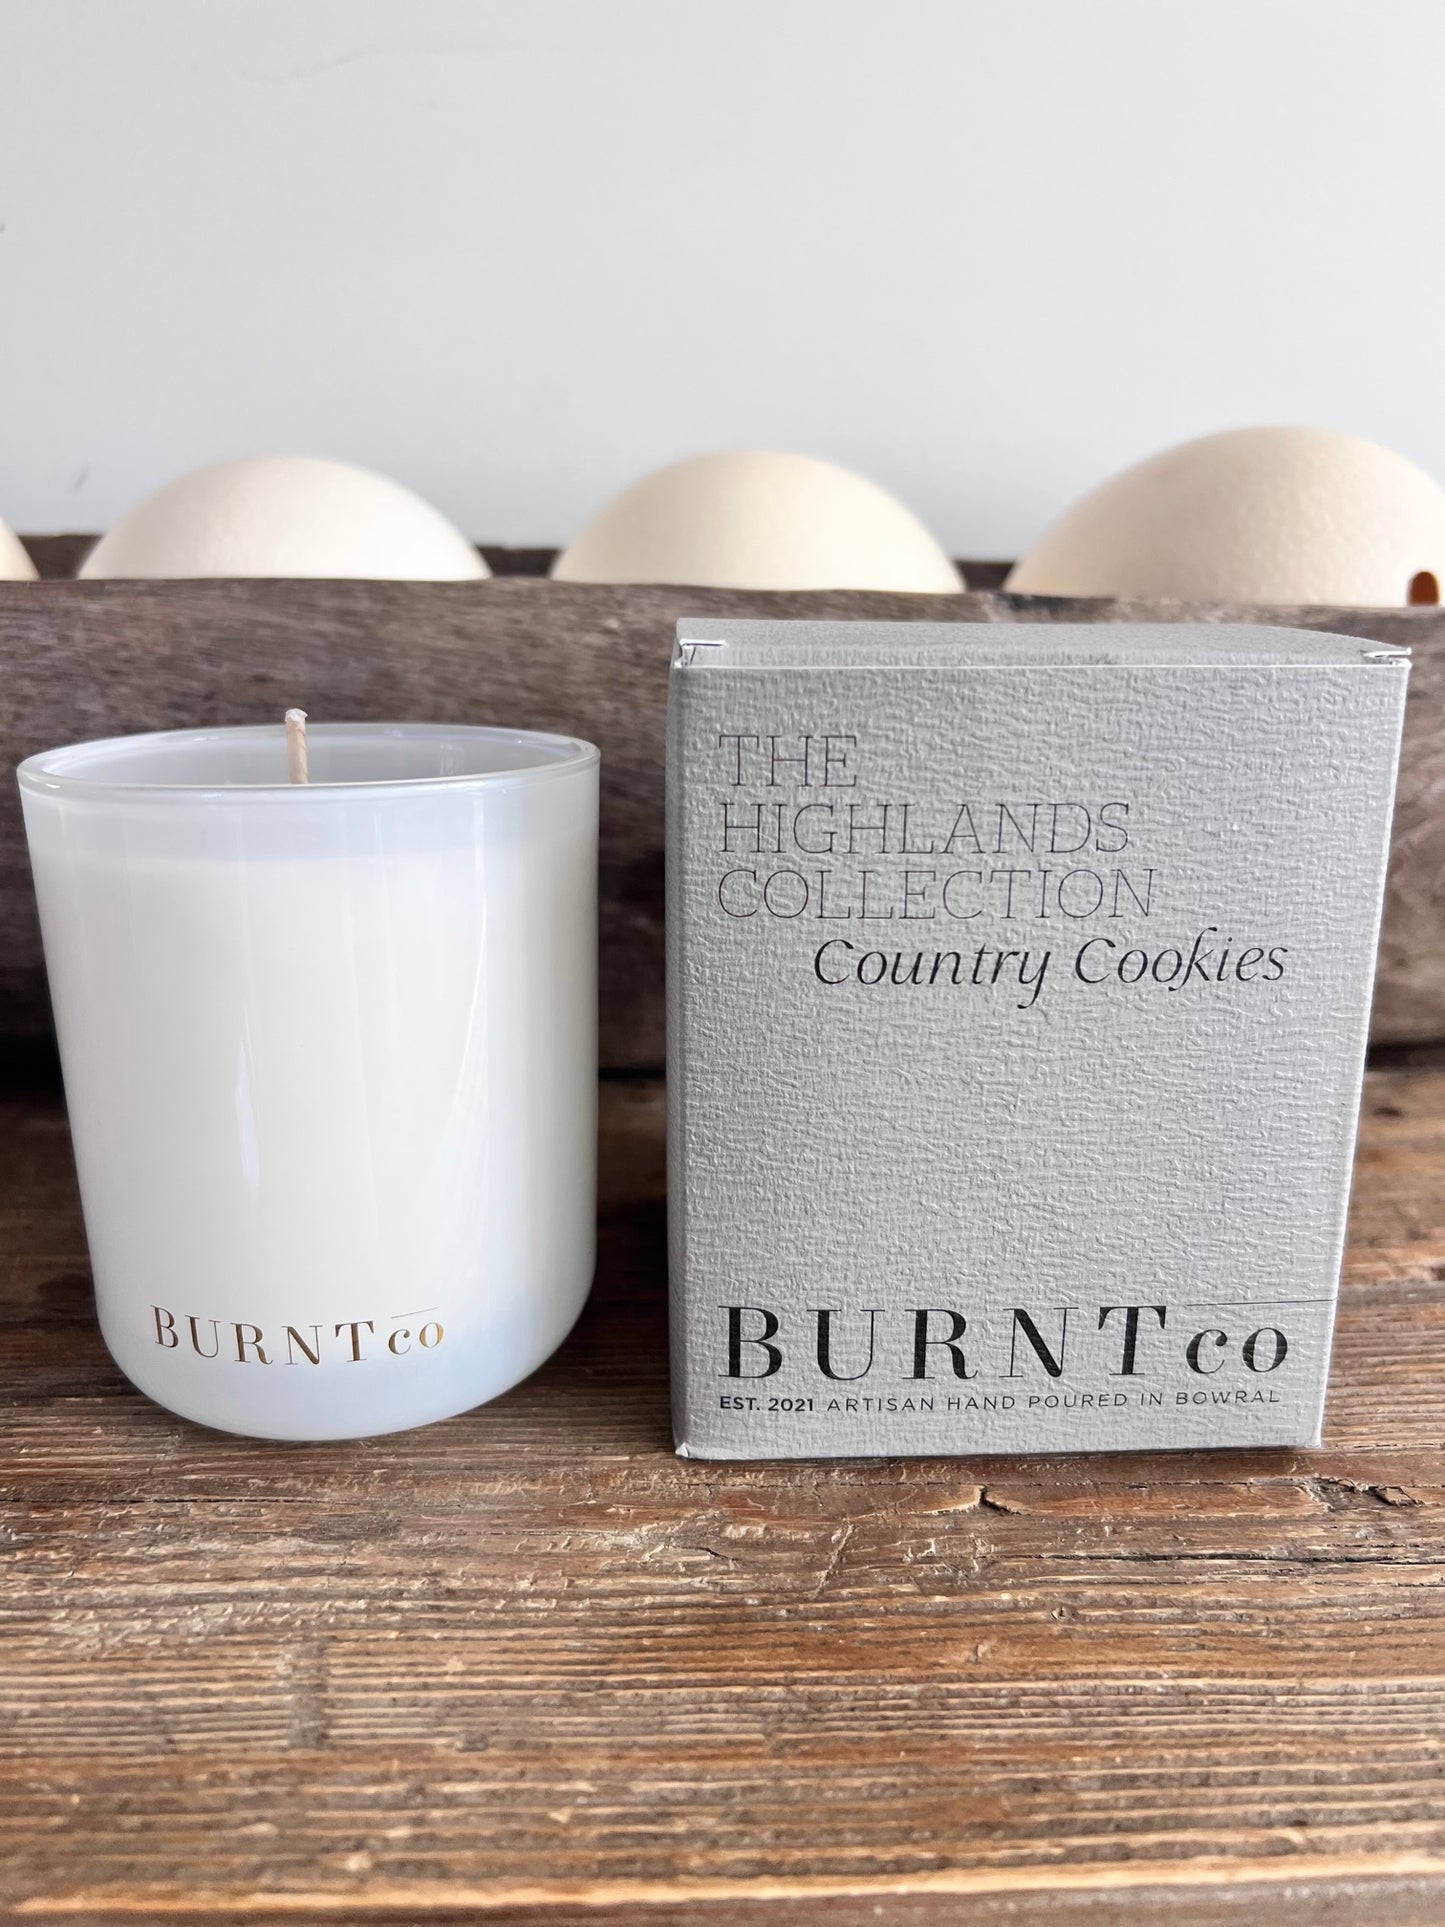 Country Cookies -THE HIGHLANDS COLLECTION